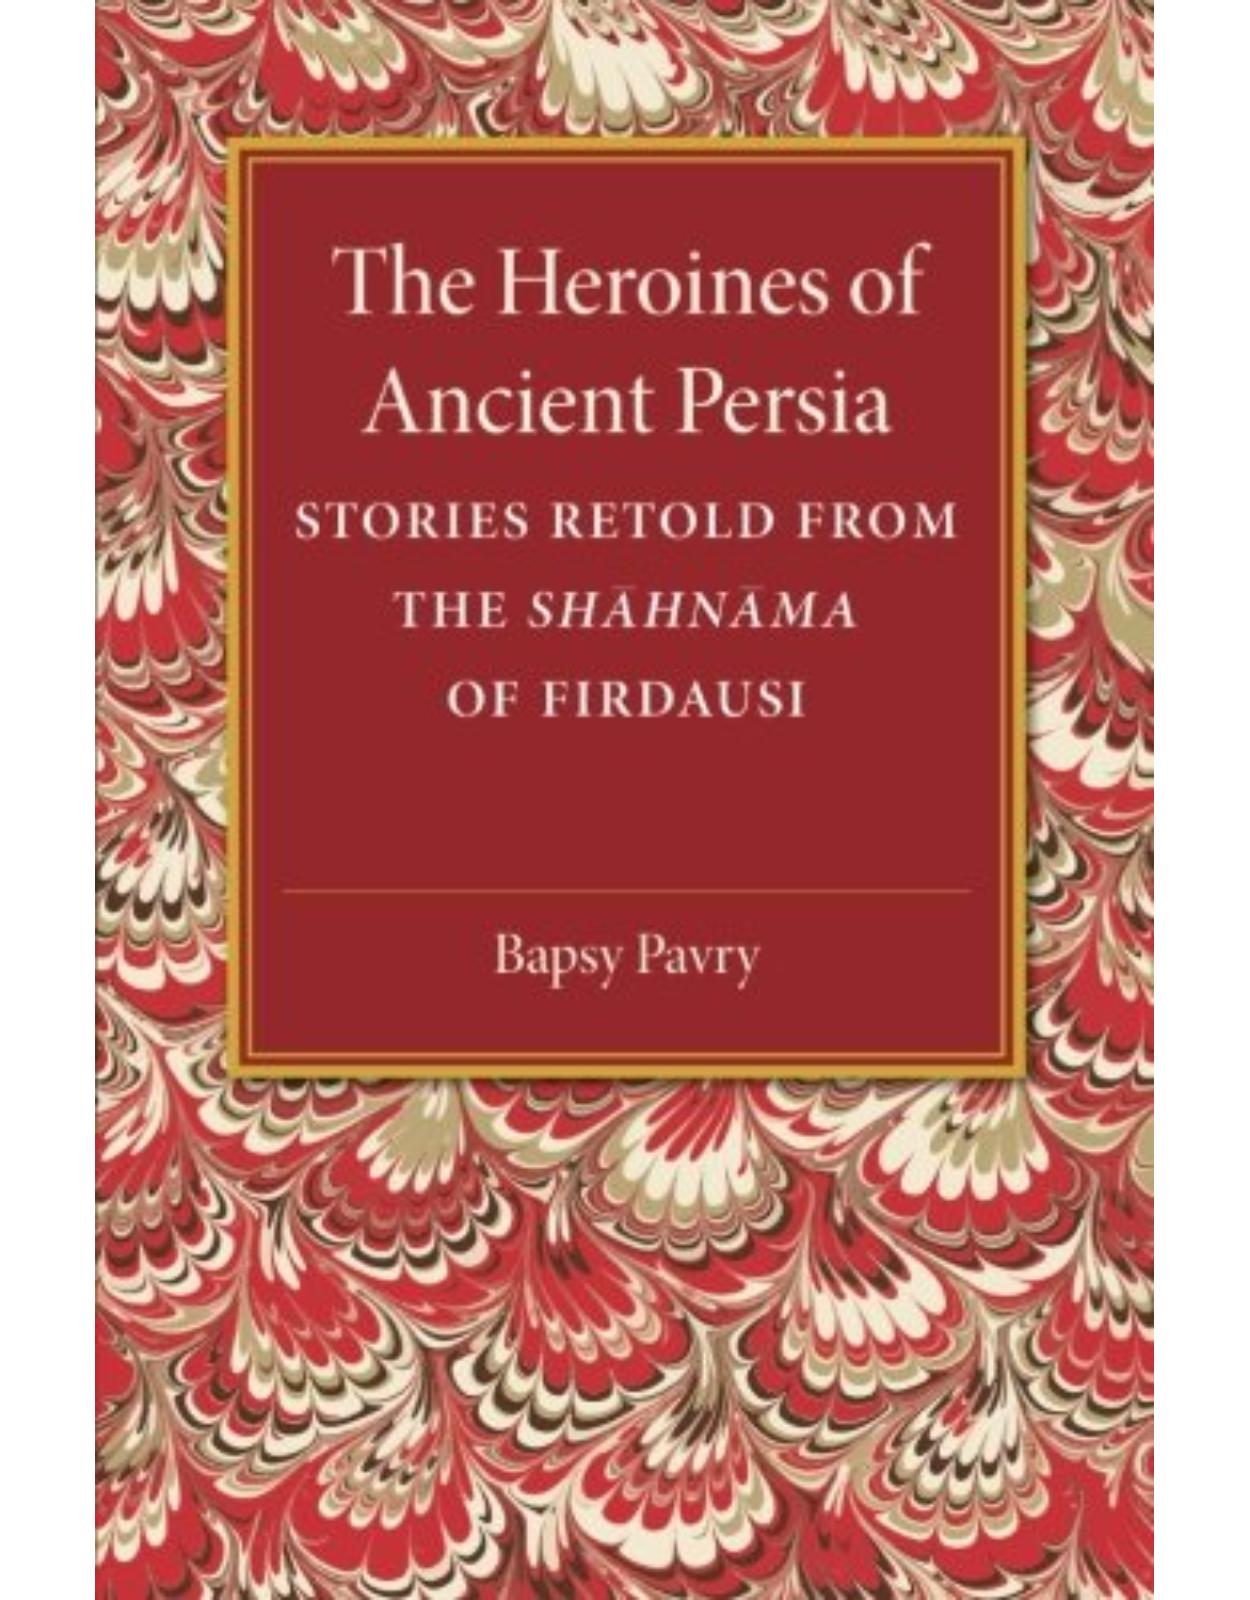 The Heroines of Ancient Persia: Stories Retold from the Shahnama of Firdausi